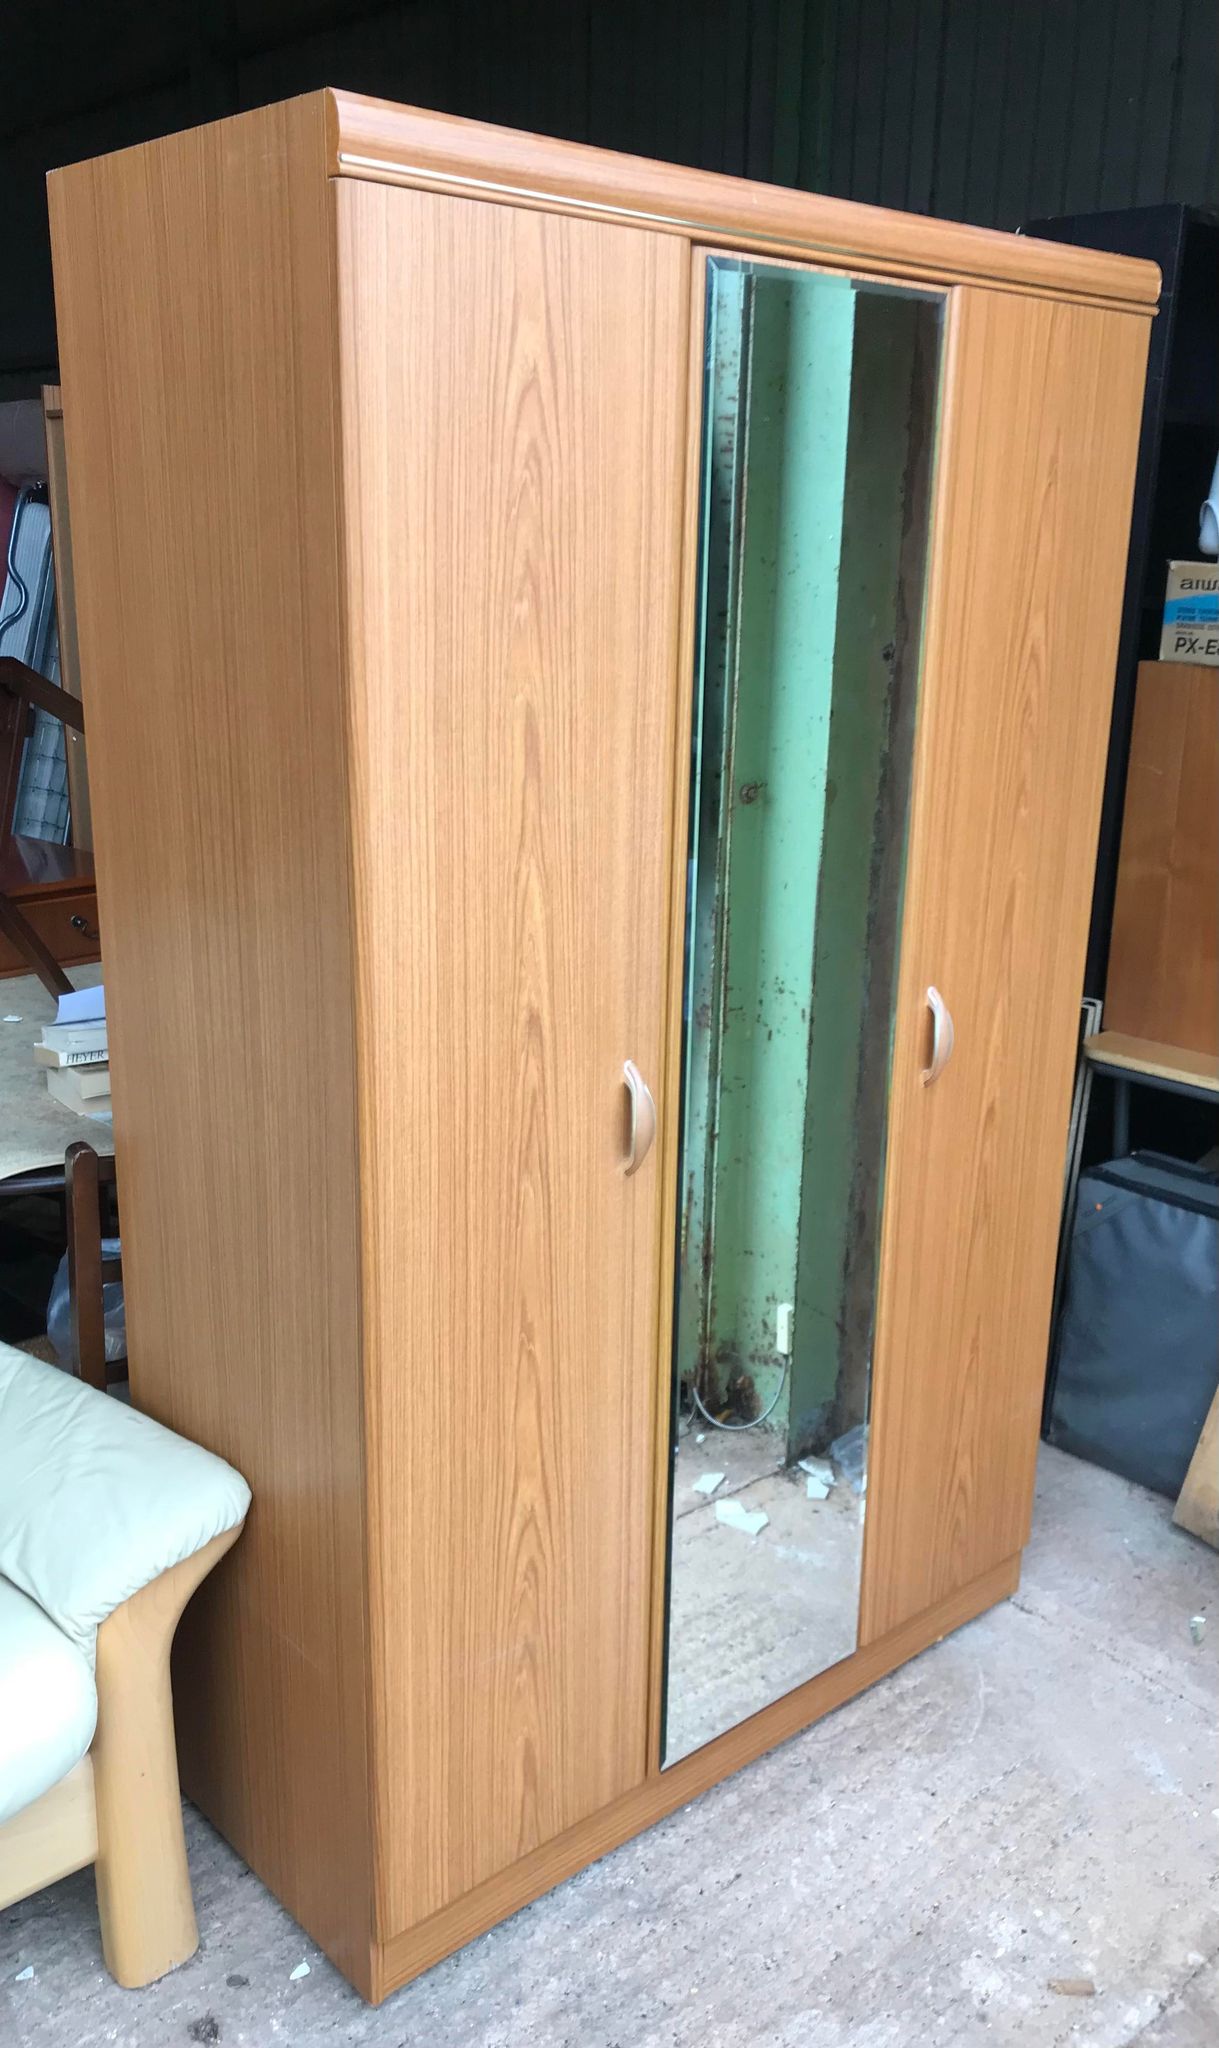 Large two-door wardrobe with fixed mirror in the middle. On wheels so easy to move around the room. 
Dimensions: 114cm wide, 52cm deep, 185cm tall.
Due to size this cannot be delivered to upstairs rooms., matching dressing table and small chest of drawers are also available.